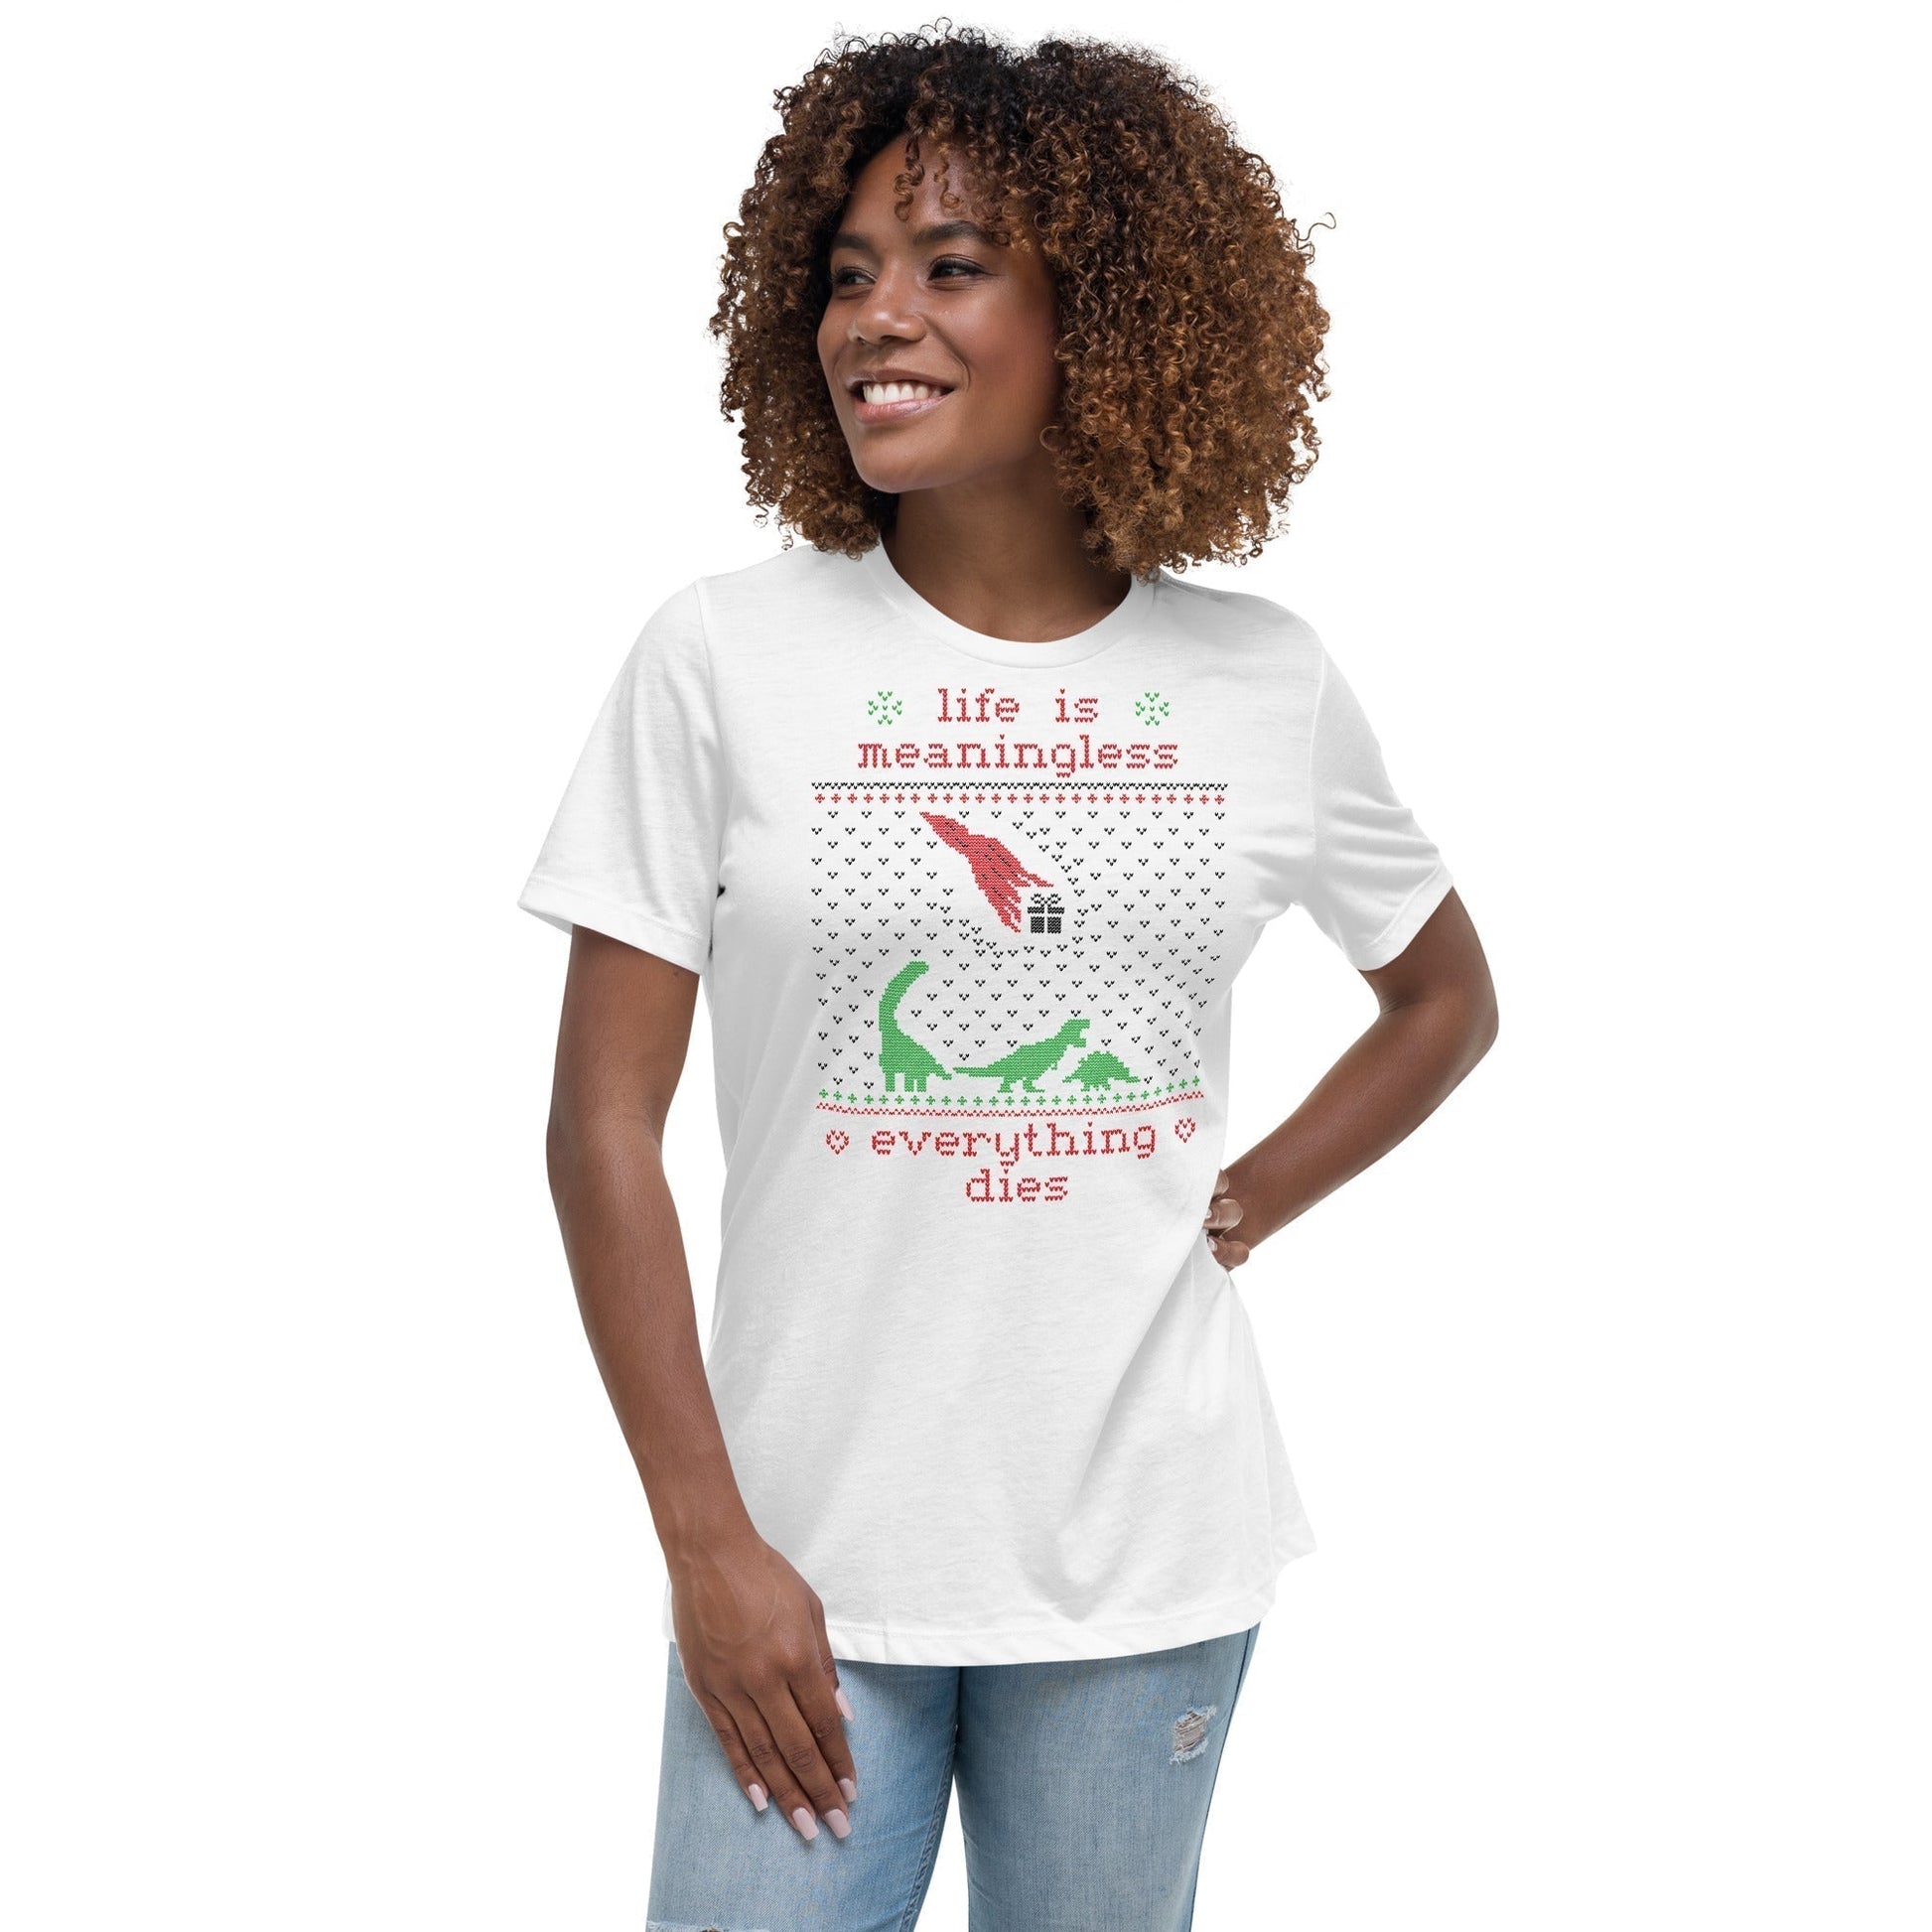 Life is meaningless - Ugly Xmas Sweater - Women's T-Shirt